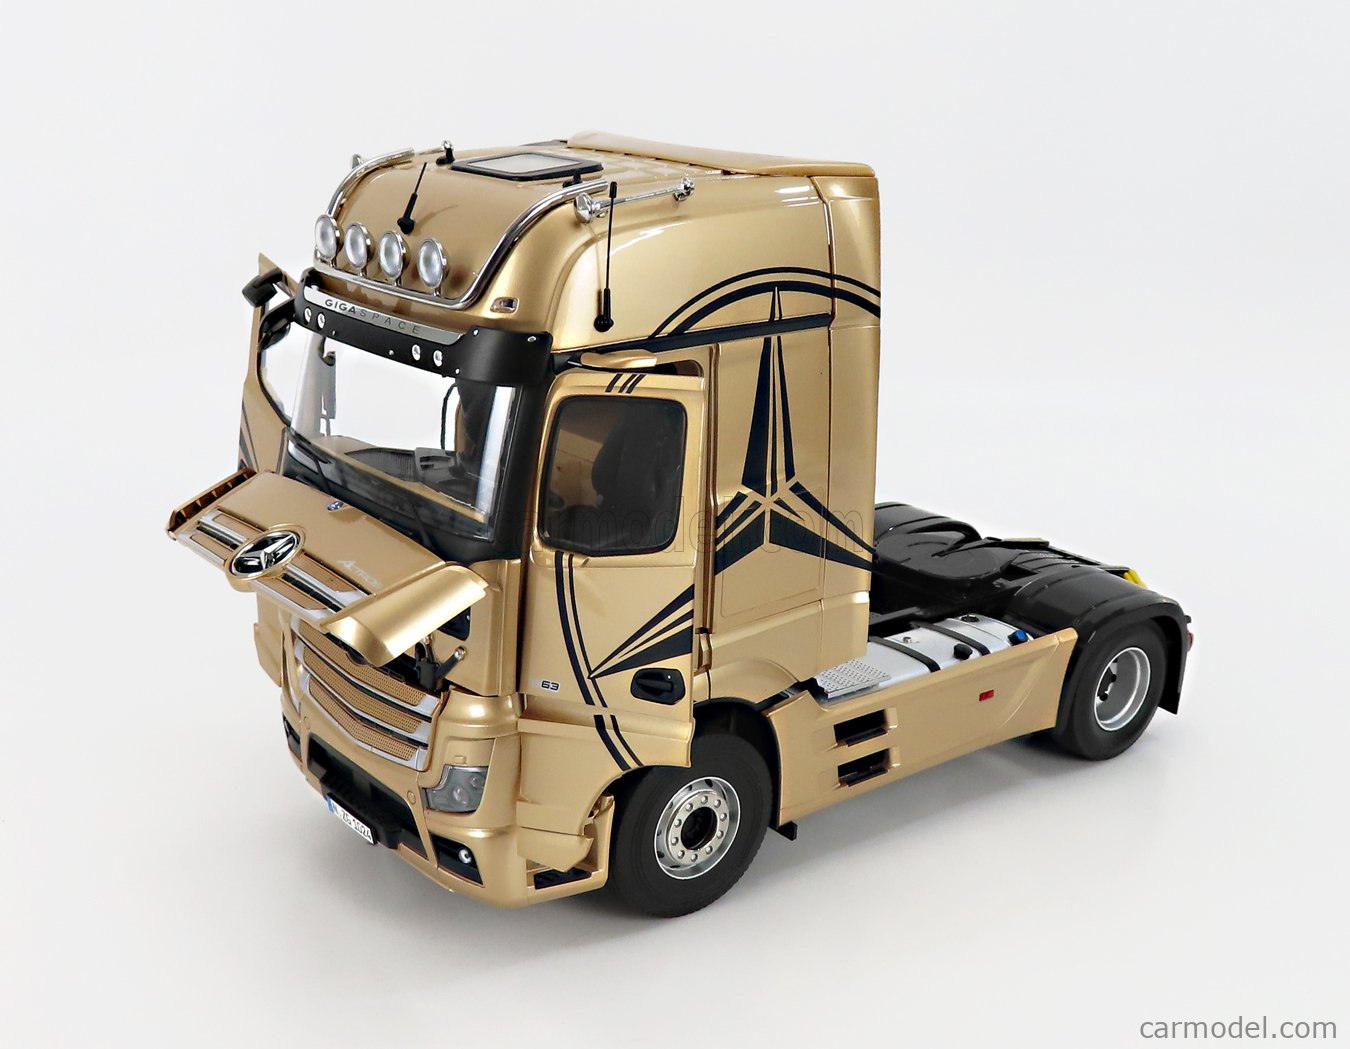 NZG LM10240066 Масштаб 1/18  MERCEDES BENZ ACTROS 2 1863 GIGASPACE 4x2 MIRRORCAM TRACTOR TRUCK LOGO MERCEDES 2-ASSI 2018 CHAMPAGNE